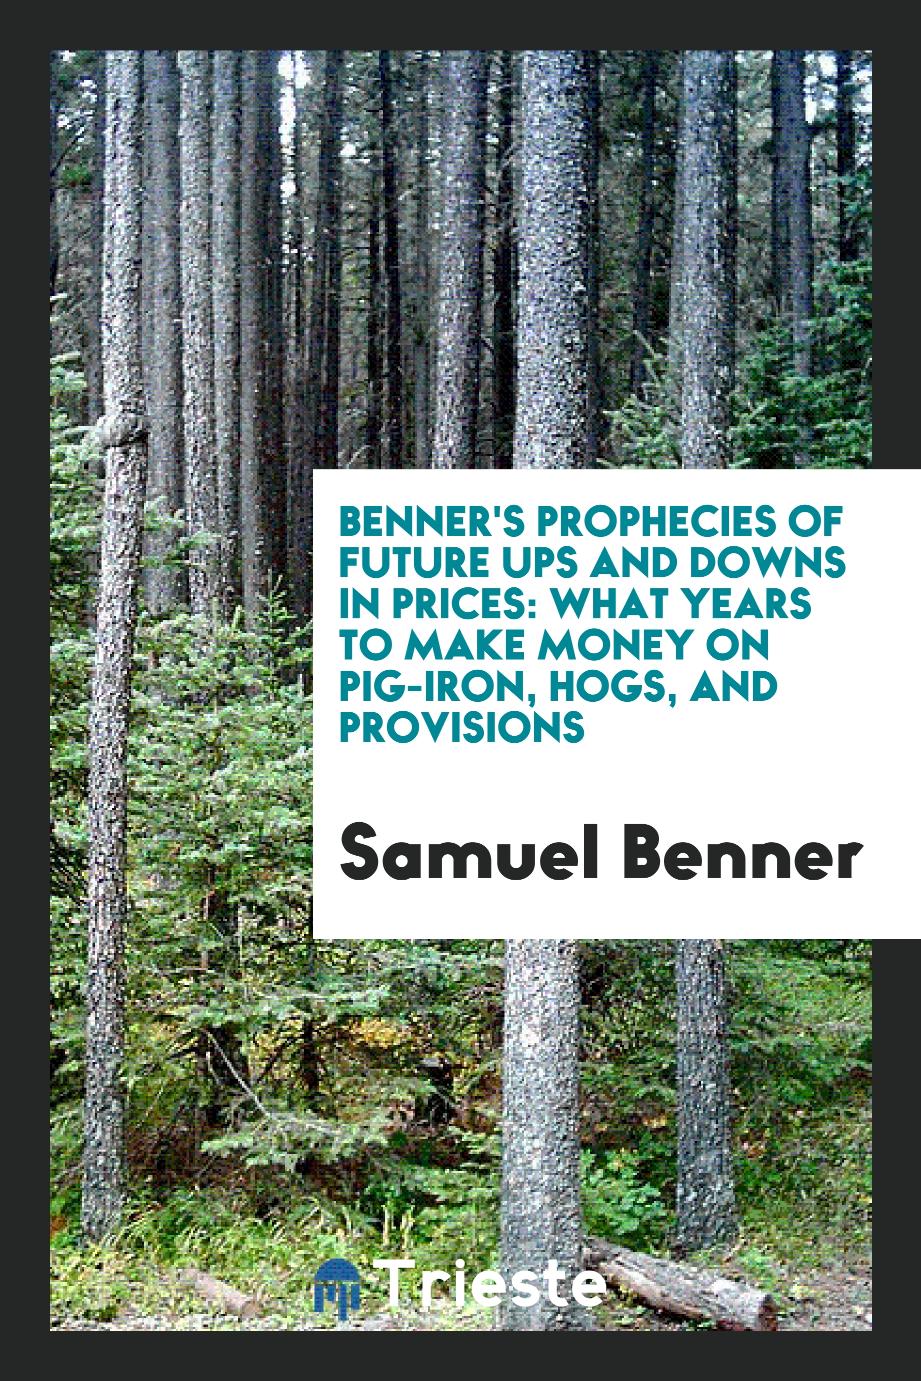 Benner's Prophecies of Future Ups and Downs in Prices: What Years to Make Money on Pig-Iron, Hogs, and Provisions